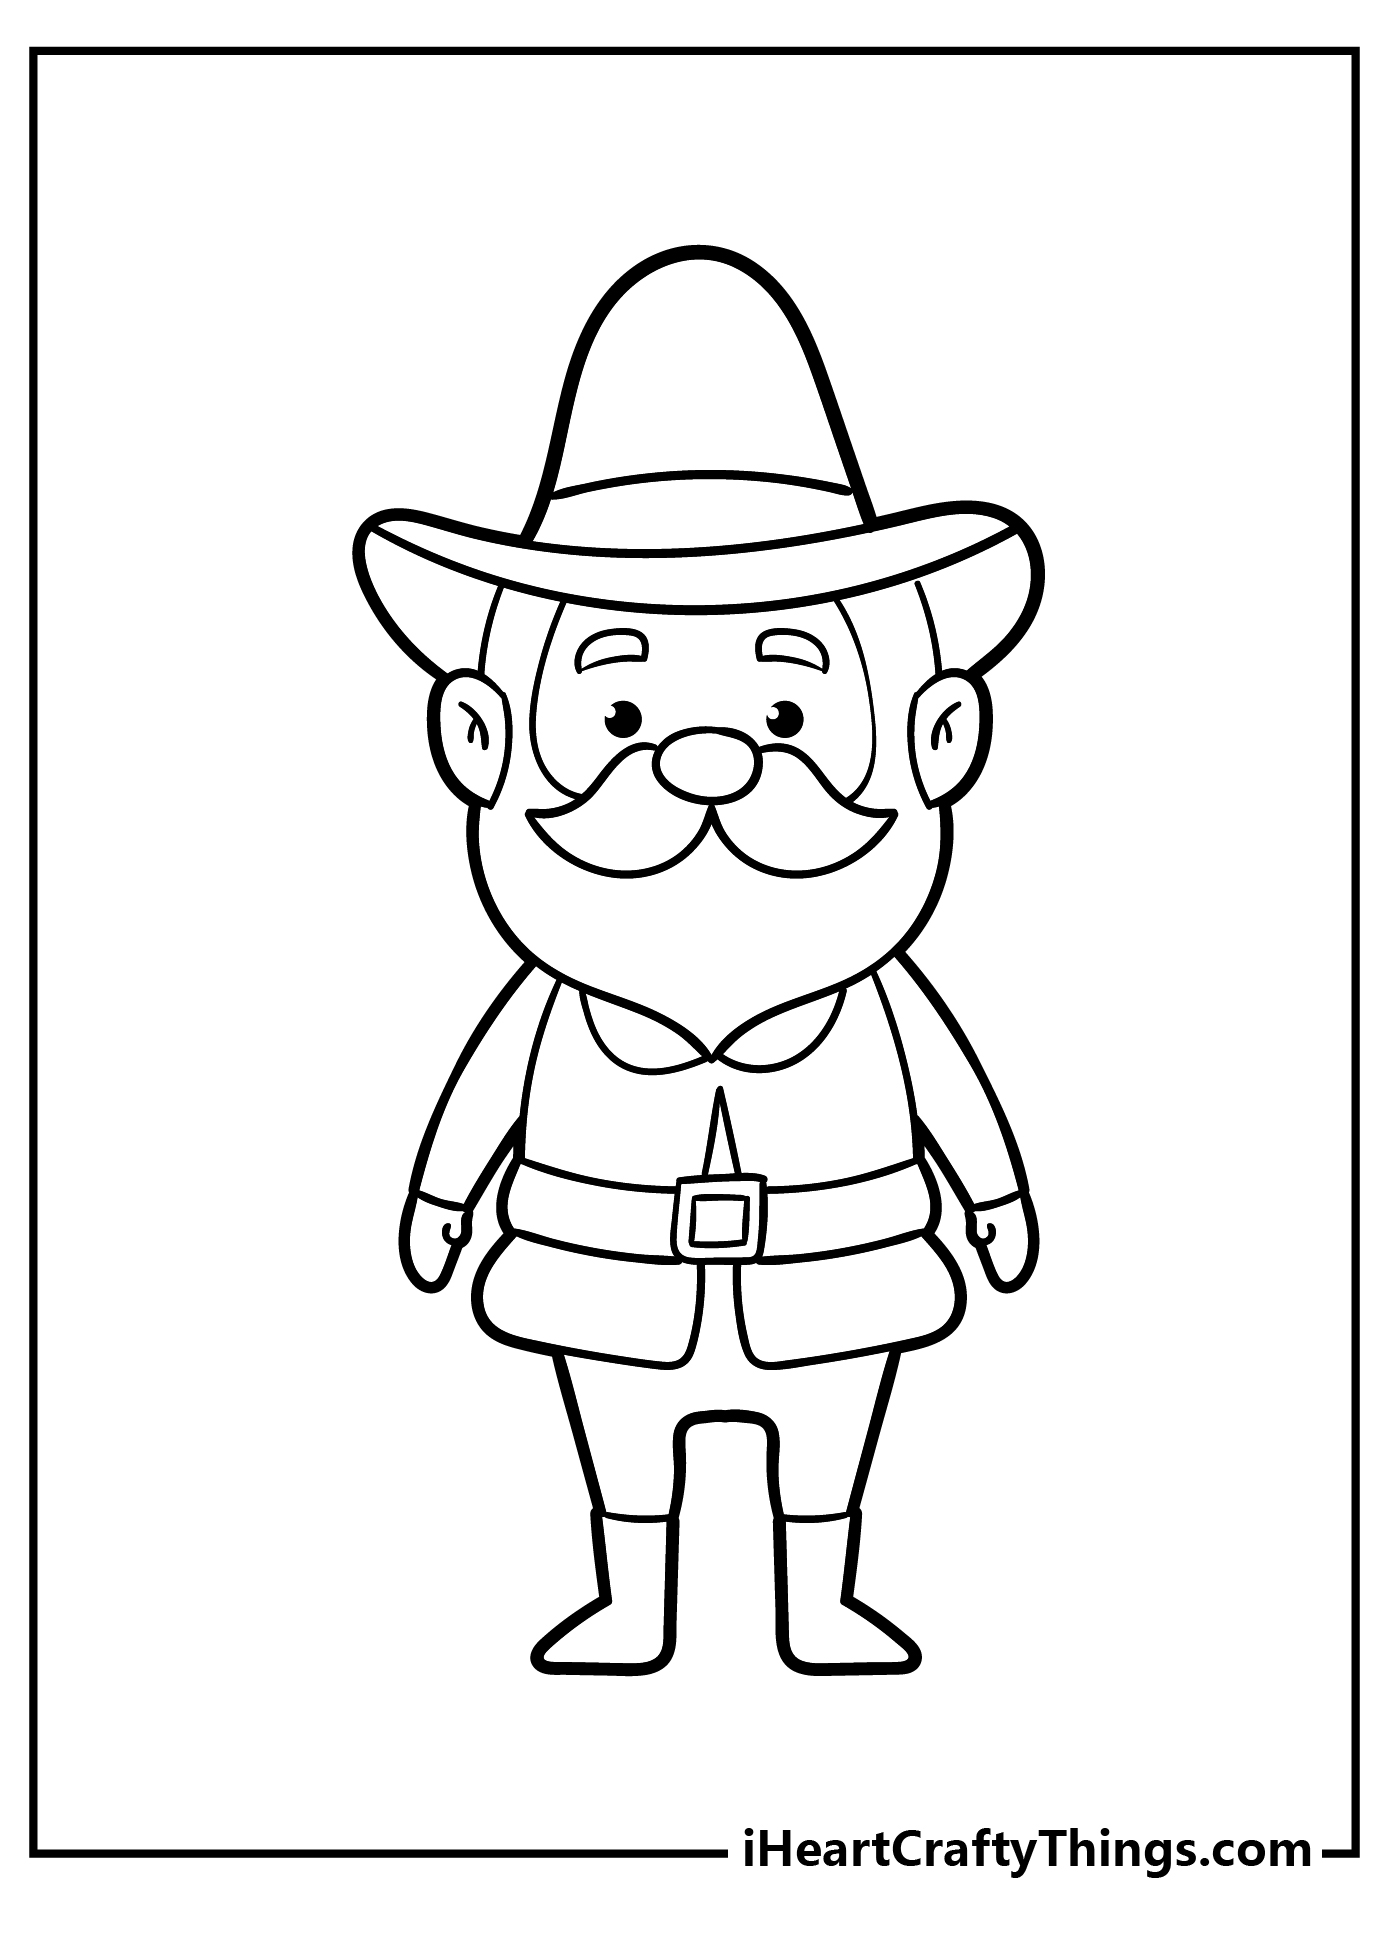 Pilgrim Coloring Pages for preschoolers free printable